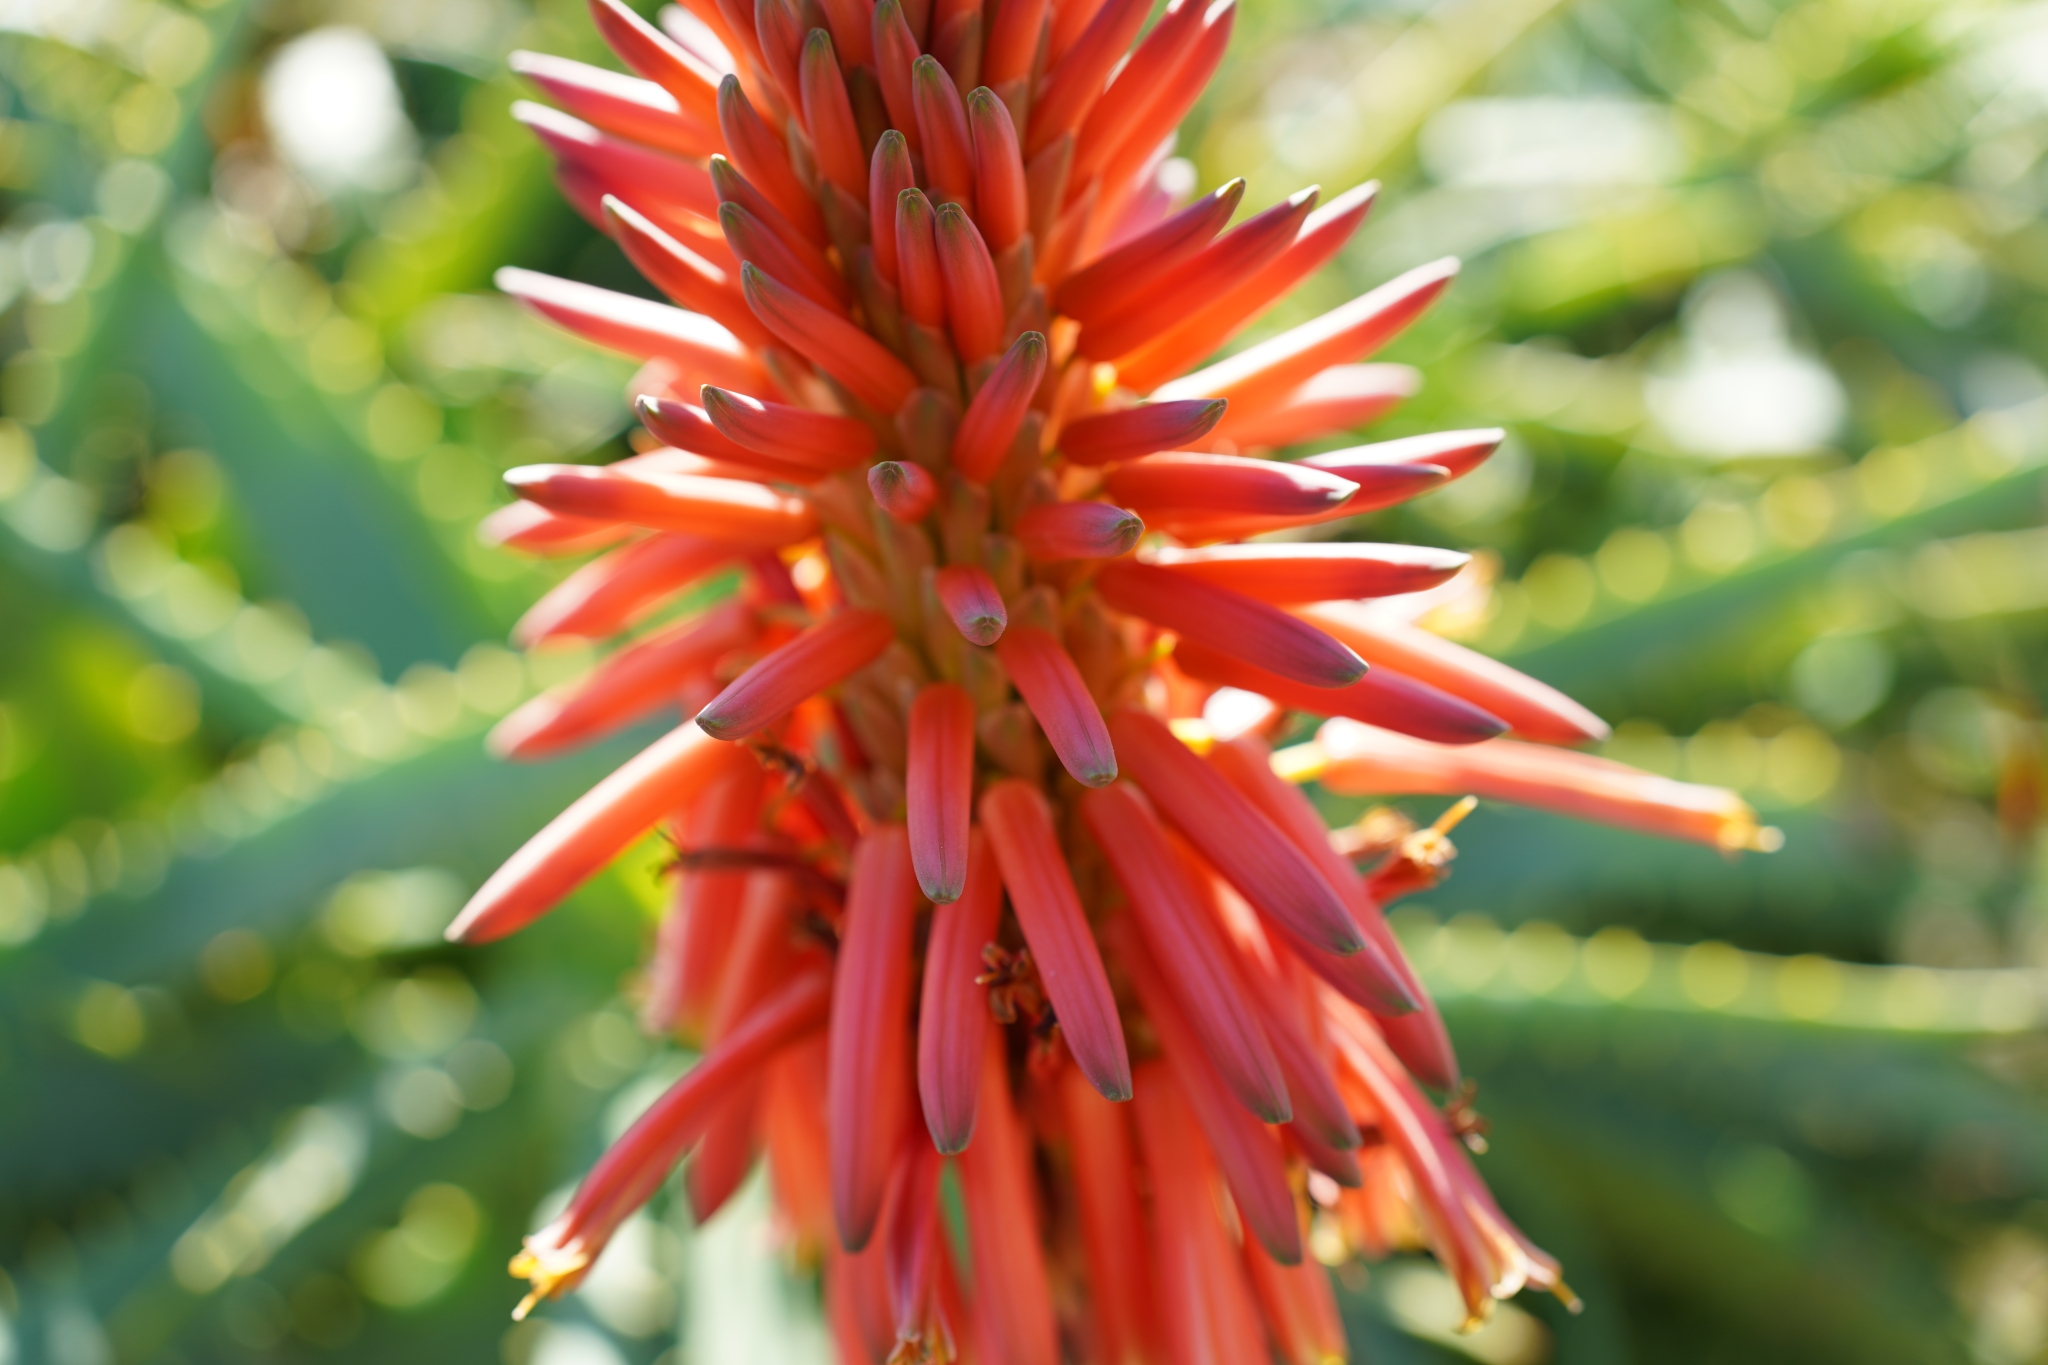 Close-up of a red spiky flower